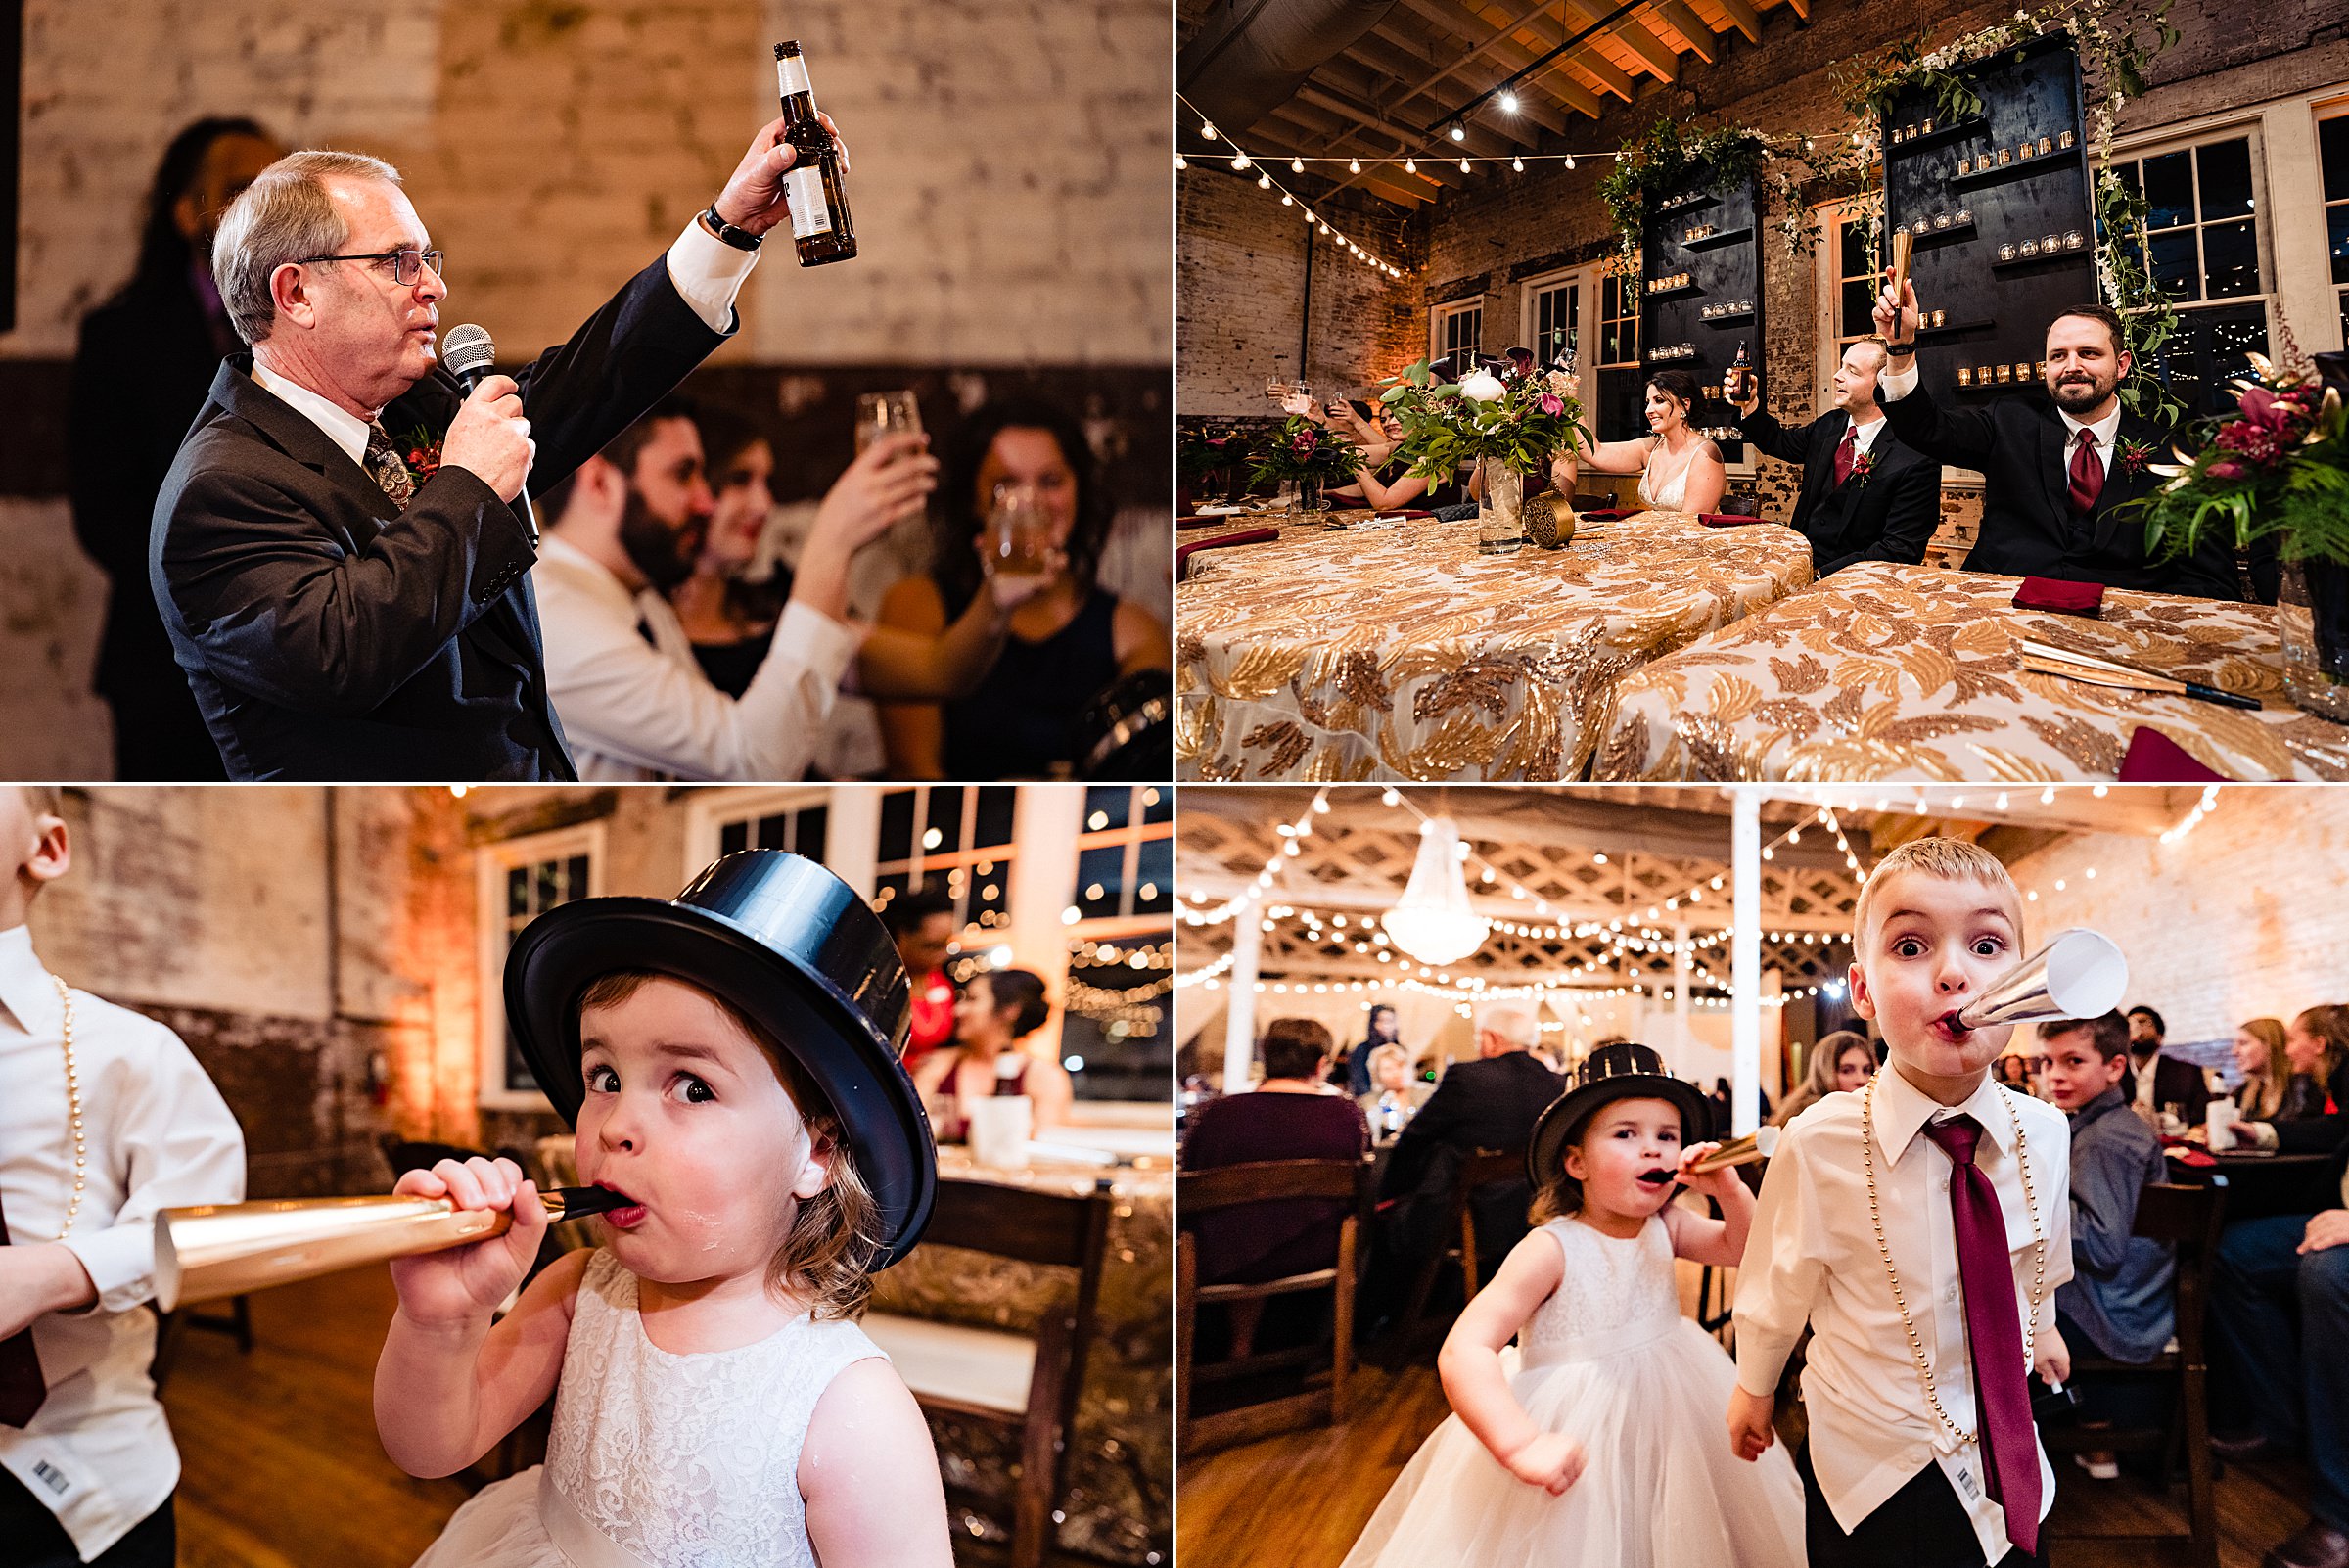 Collage of photos from a New Year's Eve wedding at The Stockroom in downtown Raleigh. Father of the groom gives a toast; bride, groom, and best man raise their glasses; flower girl and ring bearer wear party hats and use noisemakers | kivusandcamera.com